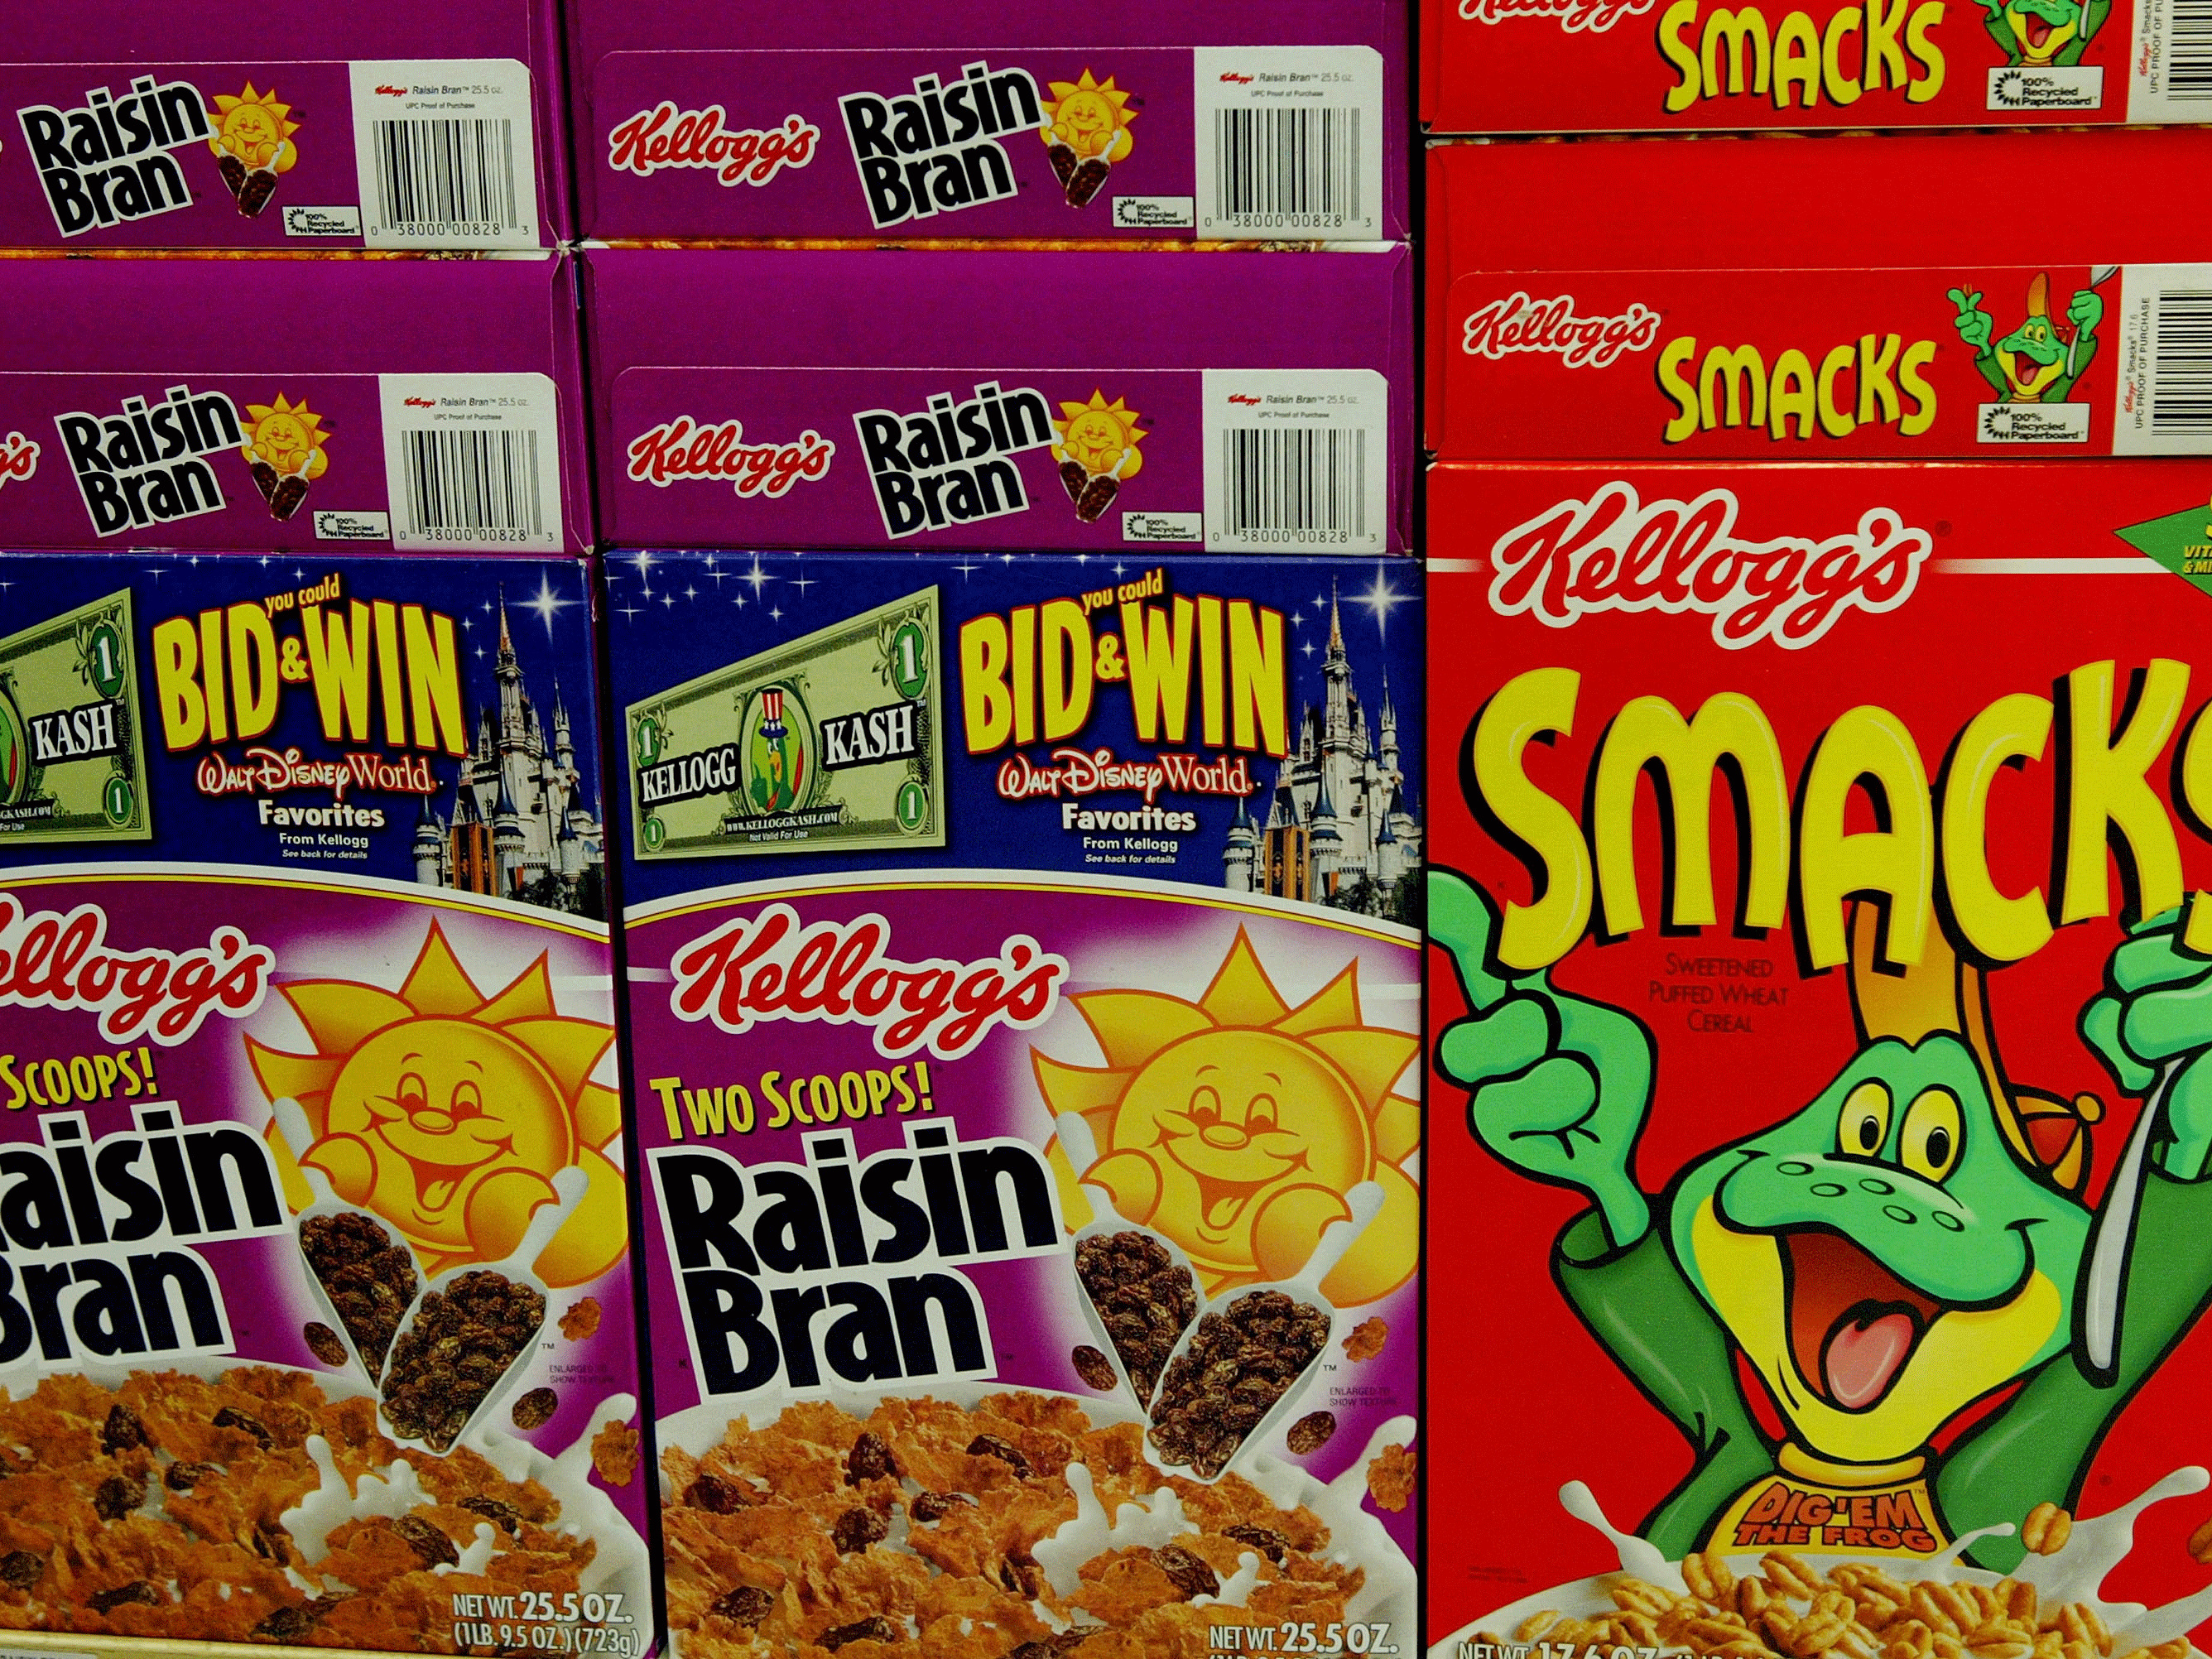 Kellogg's made the announcement after a review of clients that do not align with the cereal giant's views